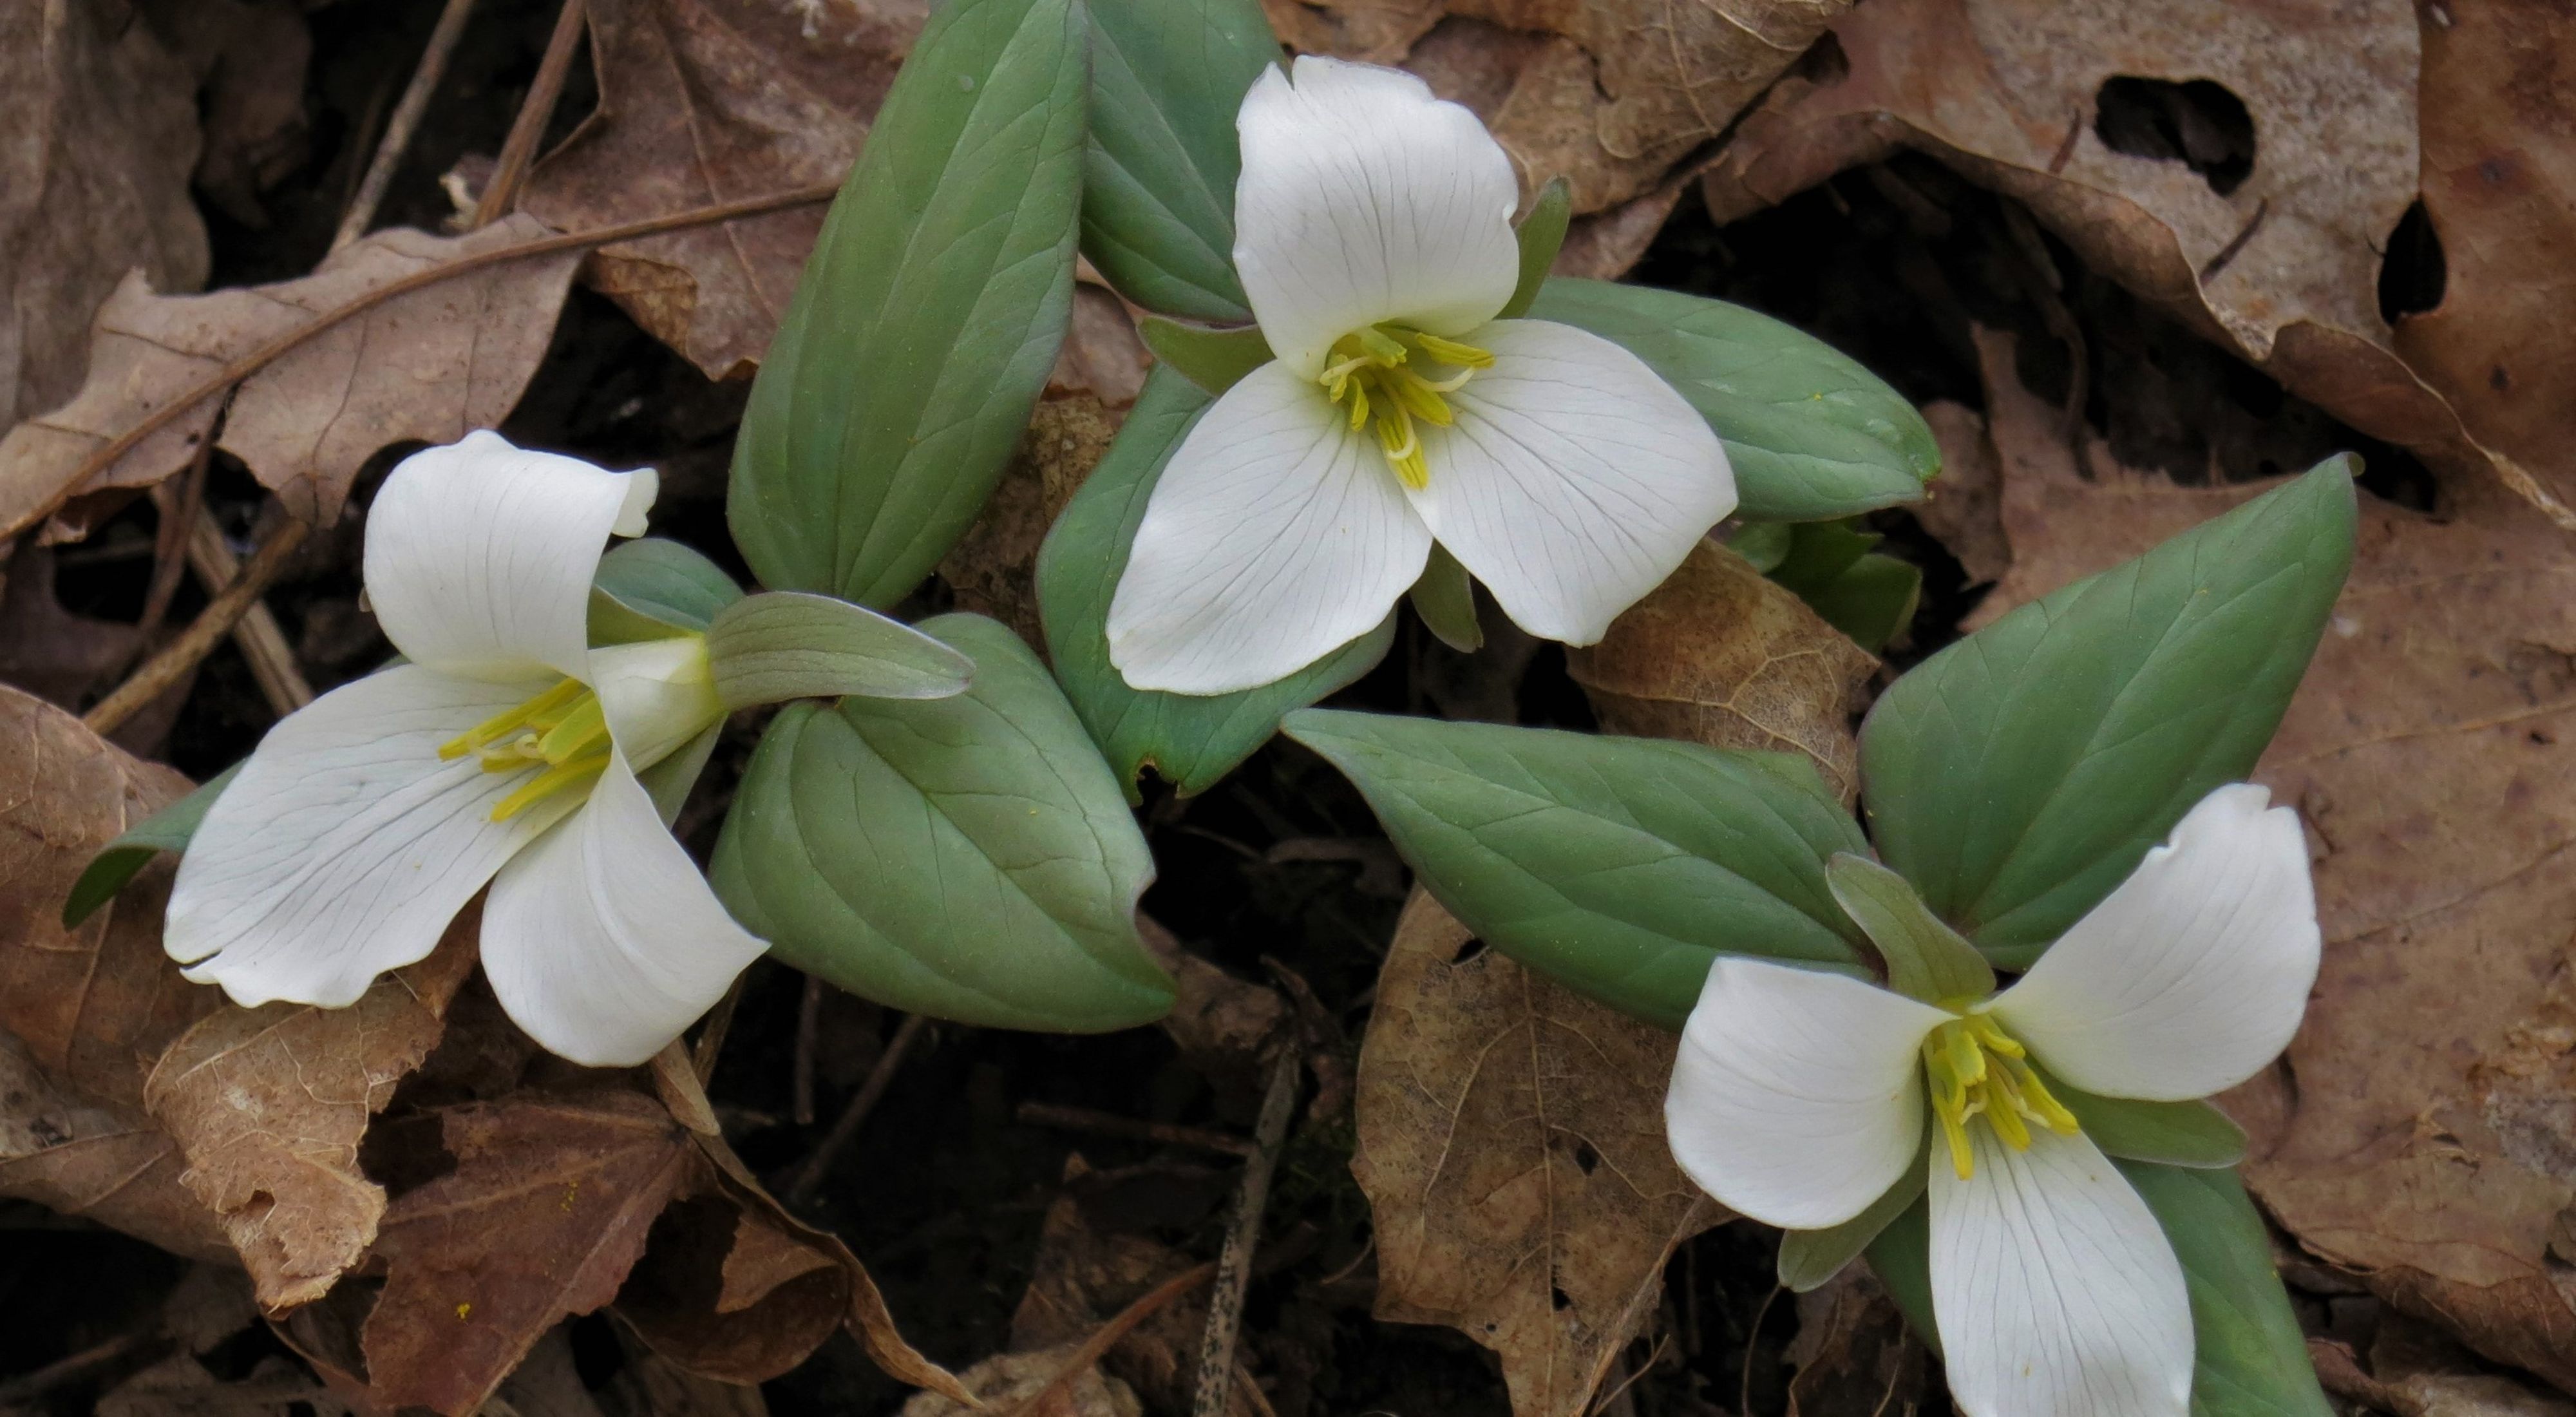 Snow trillium growing out of a leaf littered forest floor.